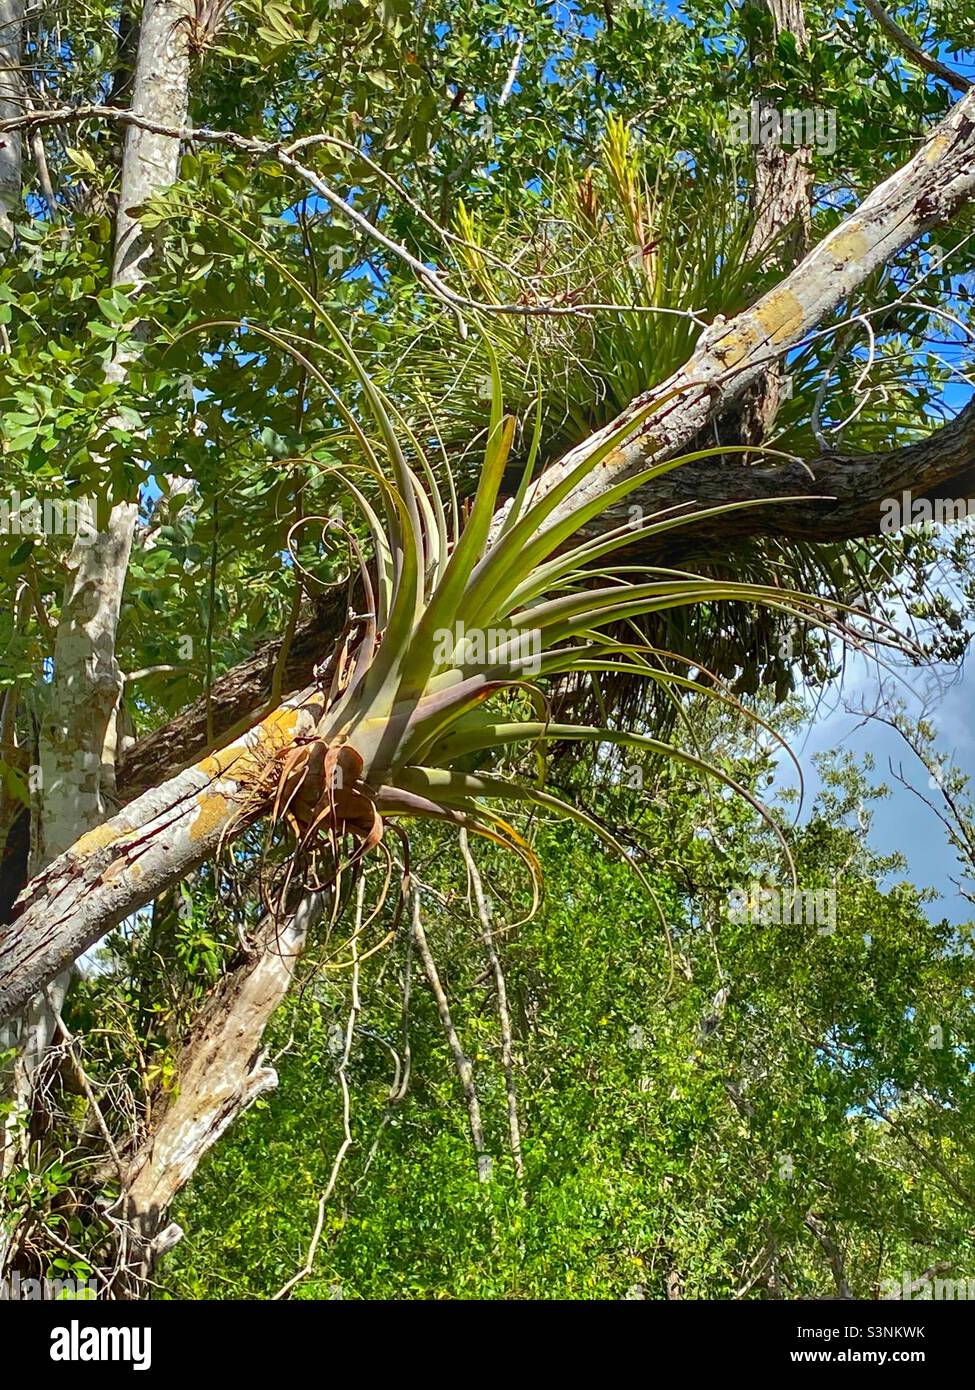 bromeliads, or air plant growing in Everglades National park Stock Photo